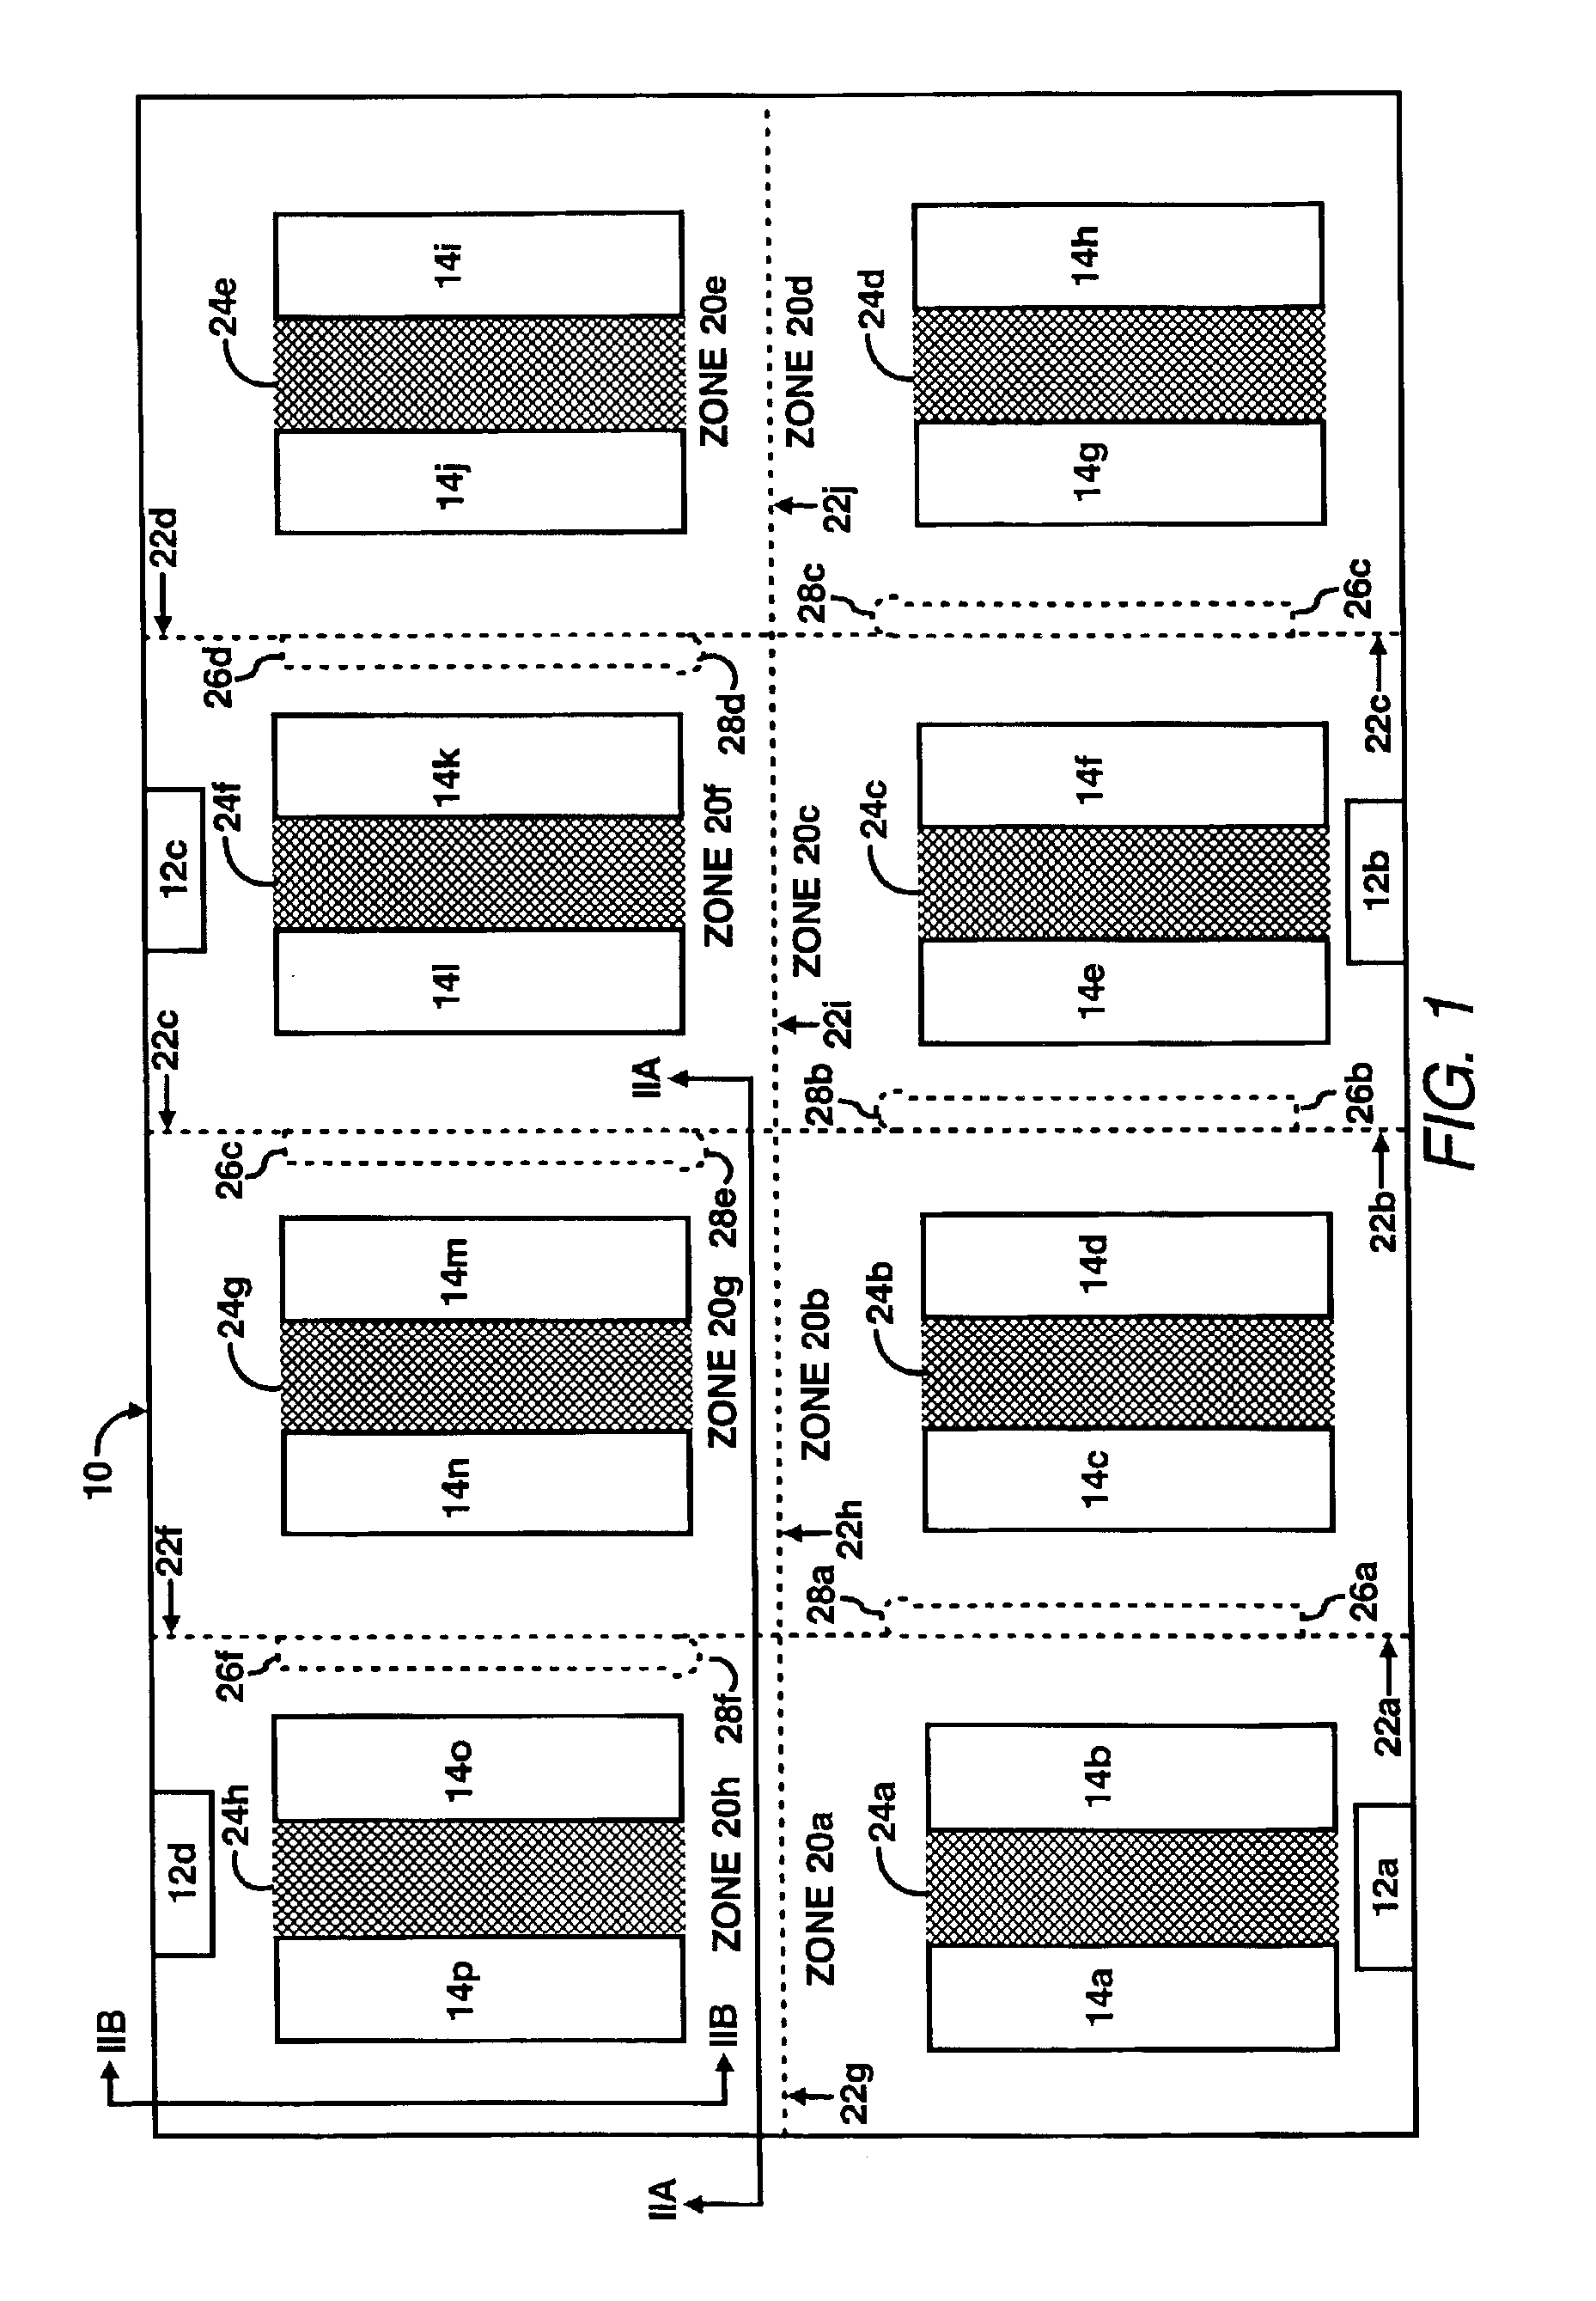 Partition for varying the supply of cooling fluid